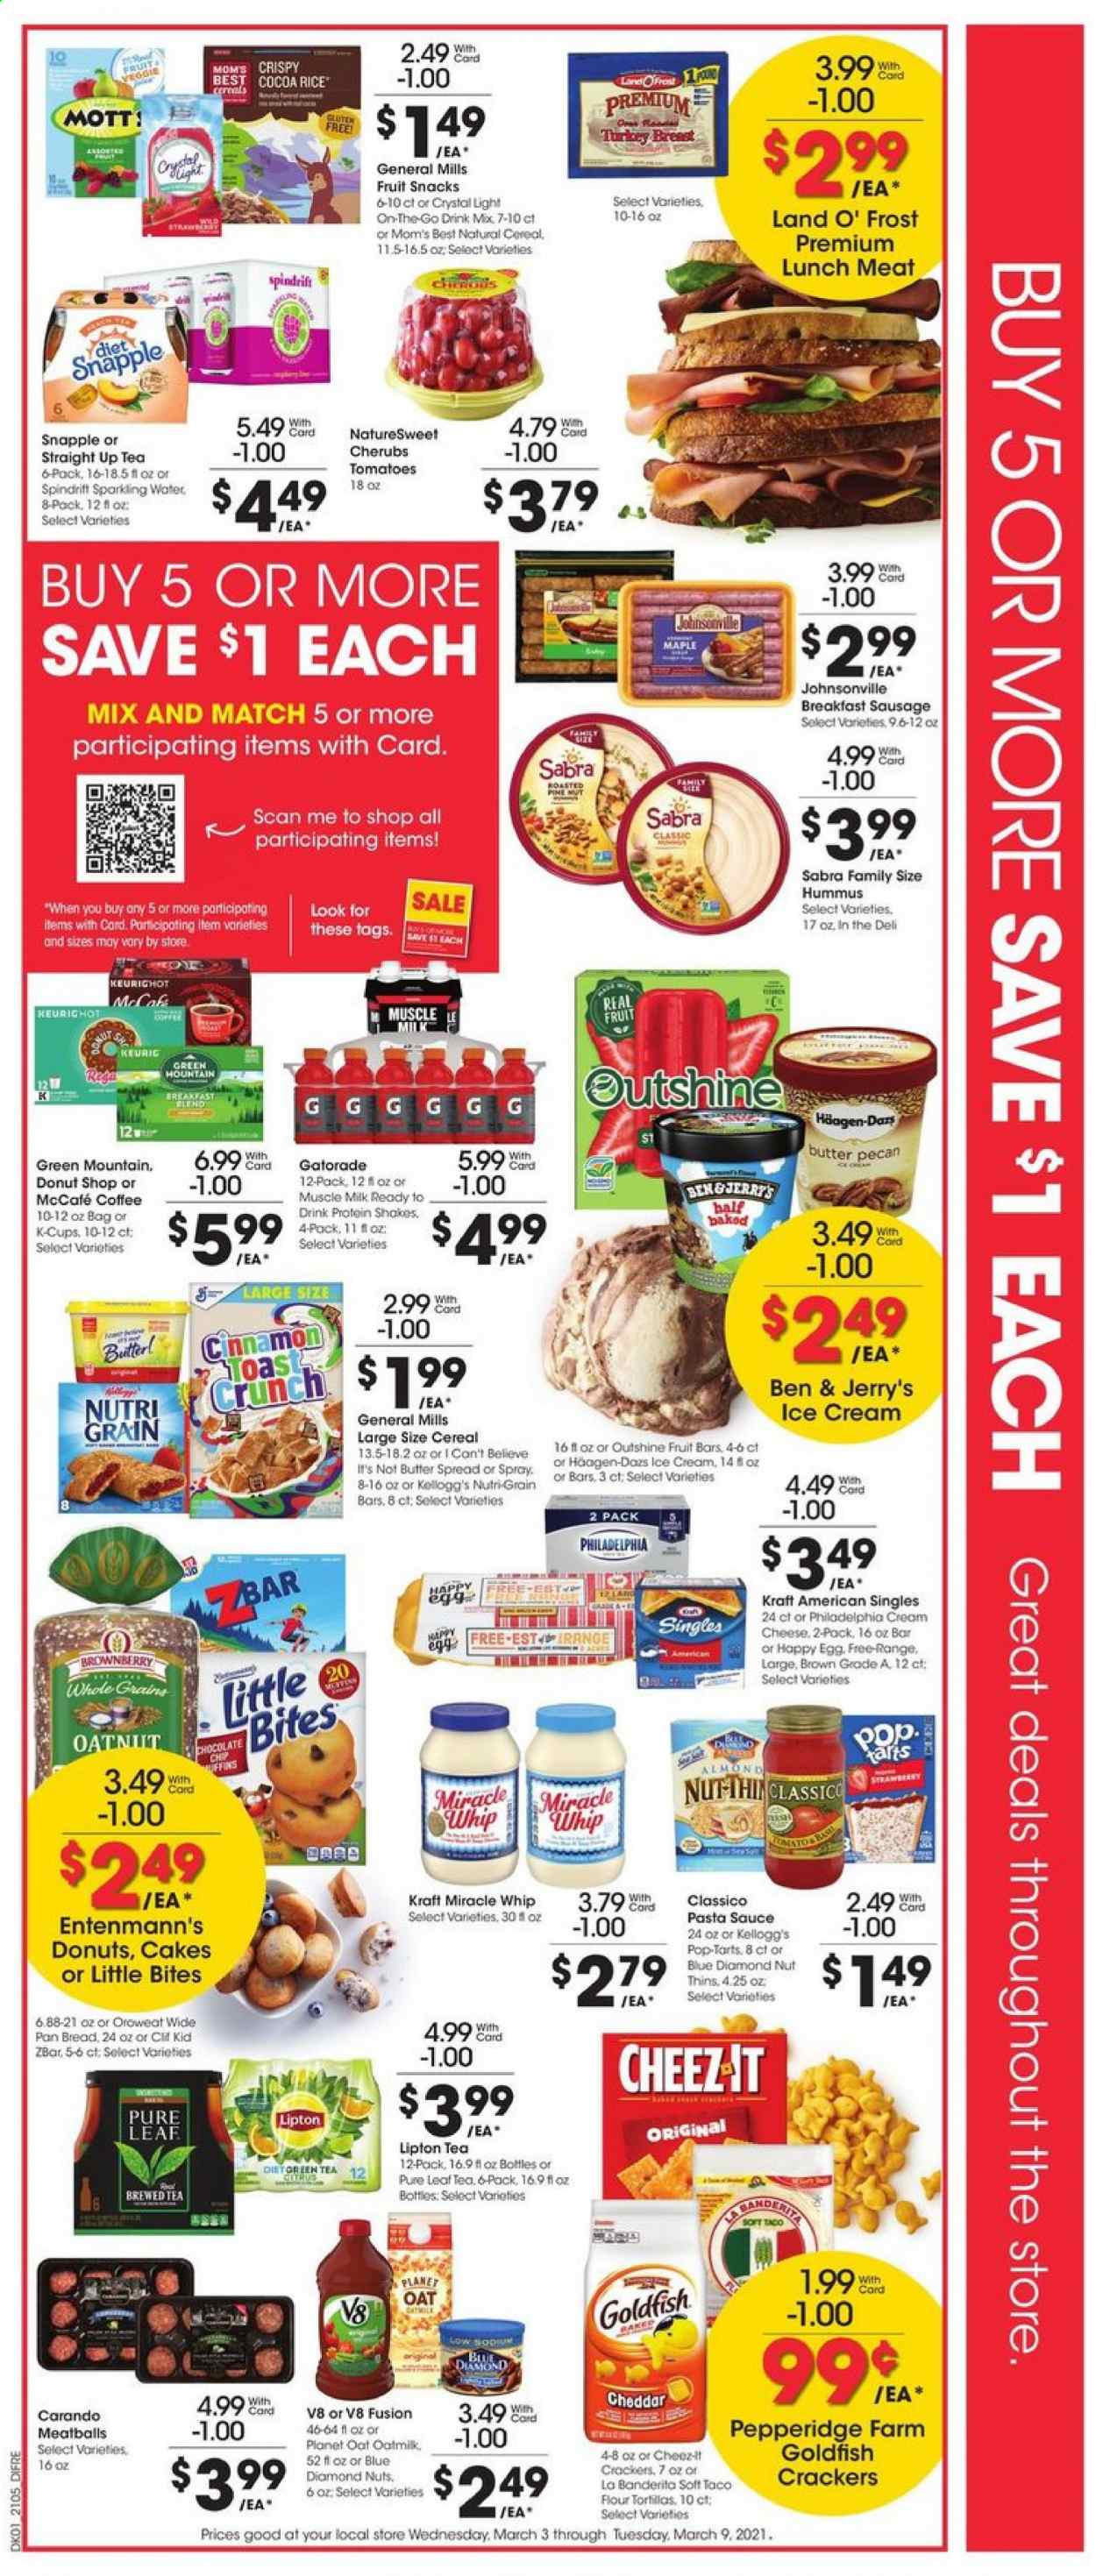 thumbnail - Baker's Flyer - 03/03/2021 - 03/09/2021 - Sales products - bread, tortillas, toast bread, Johnsonville, cake, Entenmann's, Little Bites, meatballs, sauce, Kraft®, sausage, hummus, lunch meat, Philadelphia, cheddar, cheese, Kraft Singles, milk, protein drink, shake, muscle milk, eggs, butter, I Can't Believe It's Not Butter, Miracle Whip, ice cream, Häagen-Dazs, Ben & Jerry's, crackers, Kellogg's, Pop-Tarts, fruit snack, Thins, Goldfish, Cheez-It, oats, cereals, Mom's Best, cocoa rice, Nutri-Grain, pasta sauce, almonds, Blue Diamond, Lipton, Snapple, Spindrift, Gatorade, sparkling water, tea, Pure Leaf, coffee, coffee capsules, McCafe, K-Cups, Keurig, Green Mountain, turkey breast, pan. Page 2.